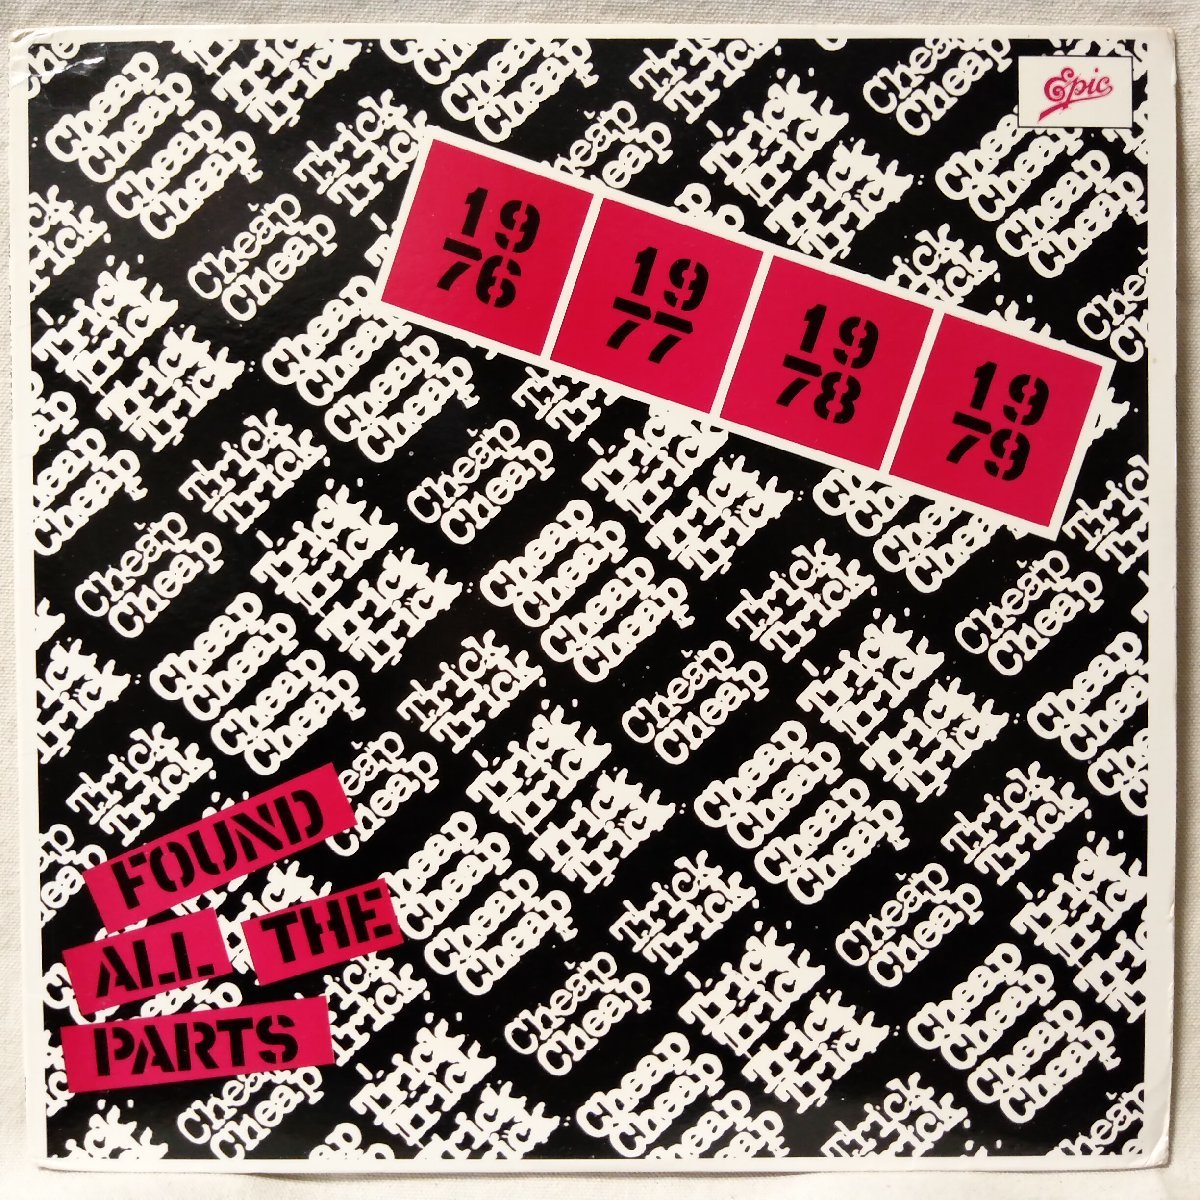 ★★CHEAP TRICK FOUND ALL THE PARTS★US盤 1980年リリース★ チープトリック アナログ盤 [1069TPR_画像1